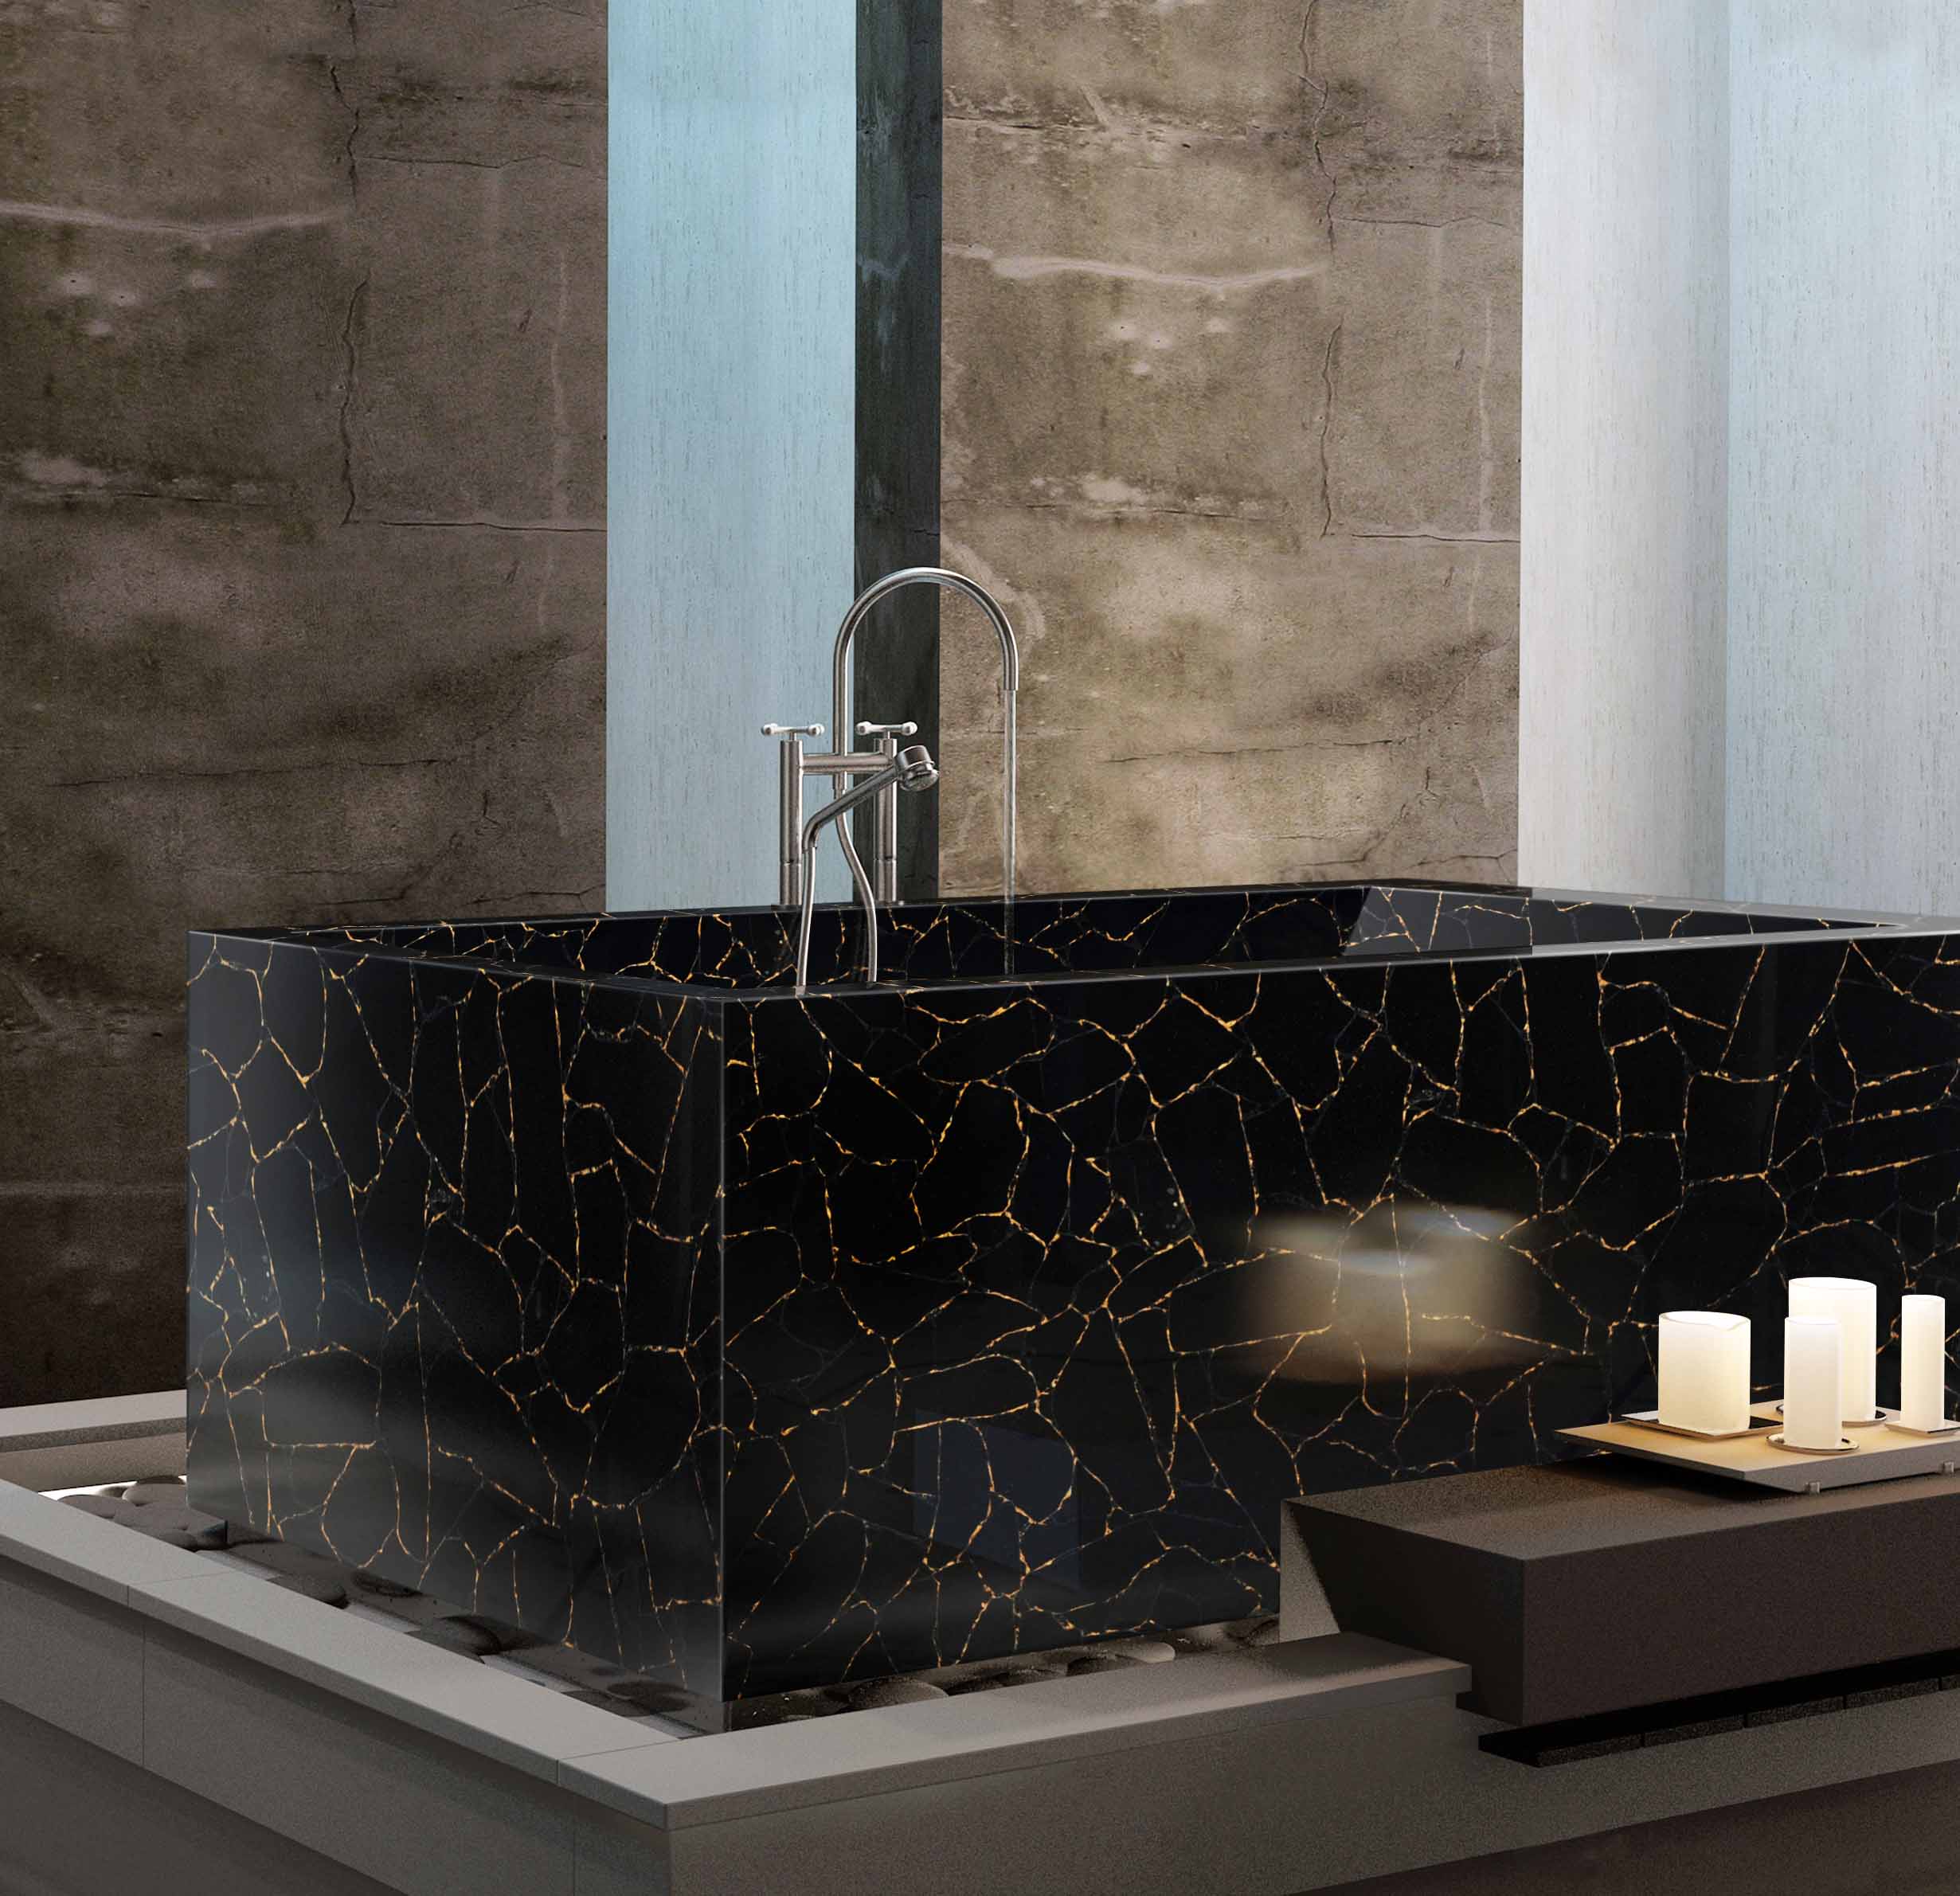 Obsidian Black With Gold Bathtube Absolute Kitchen Granite